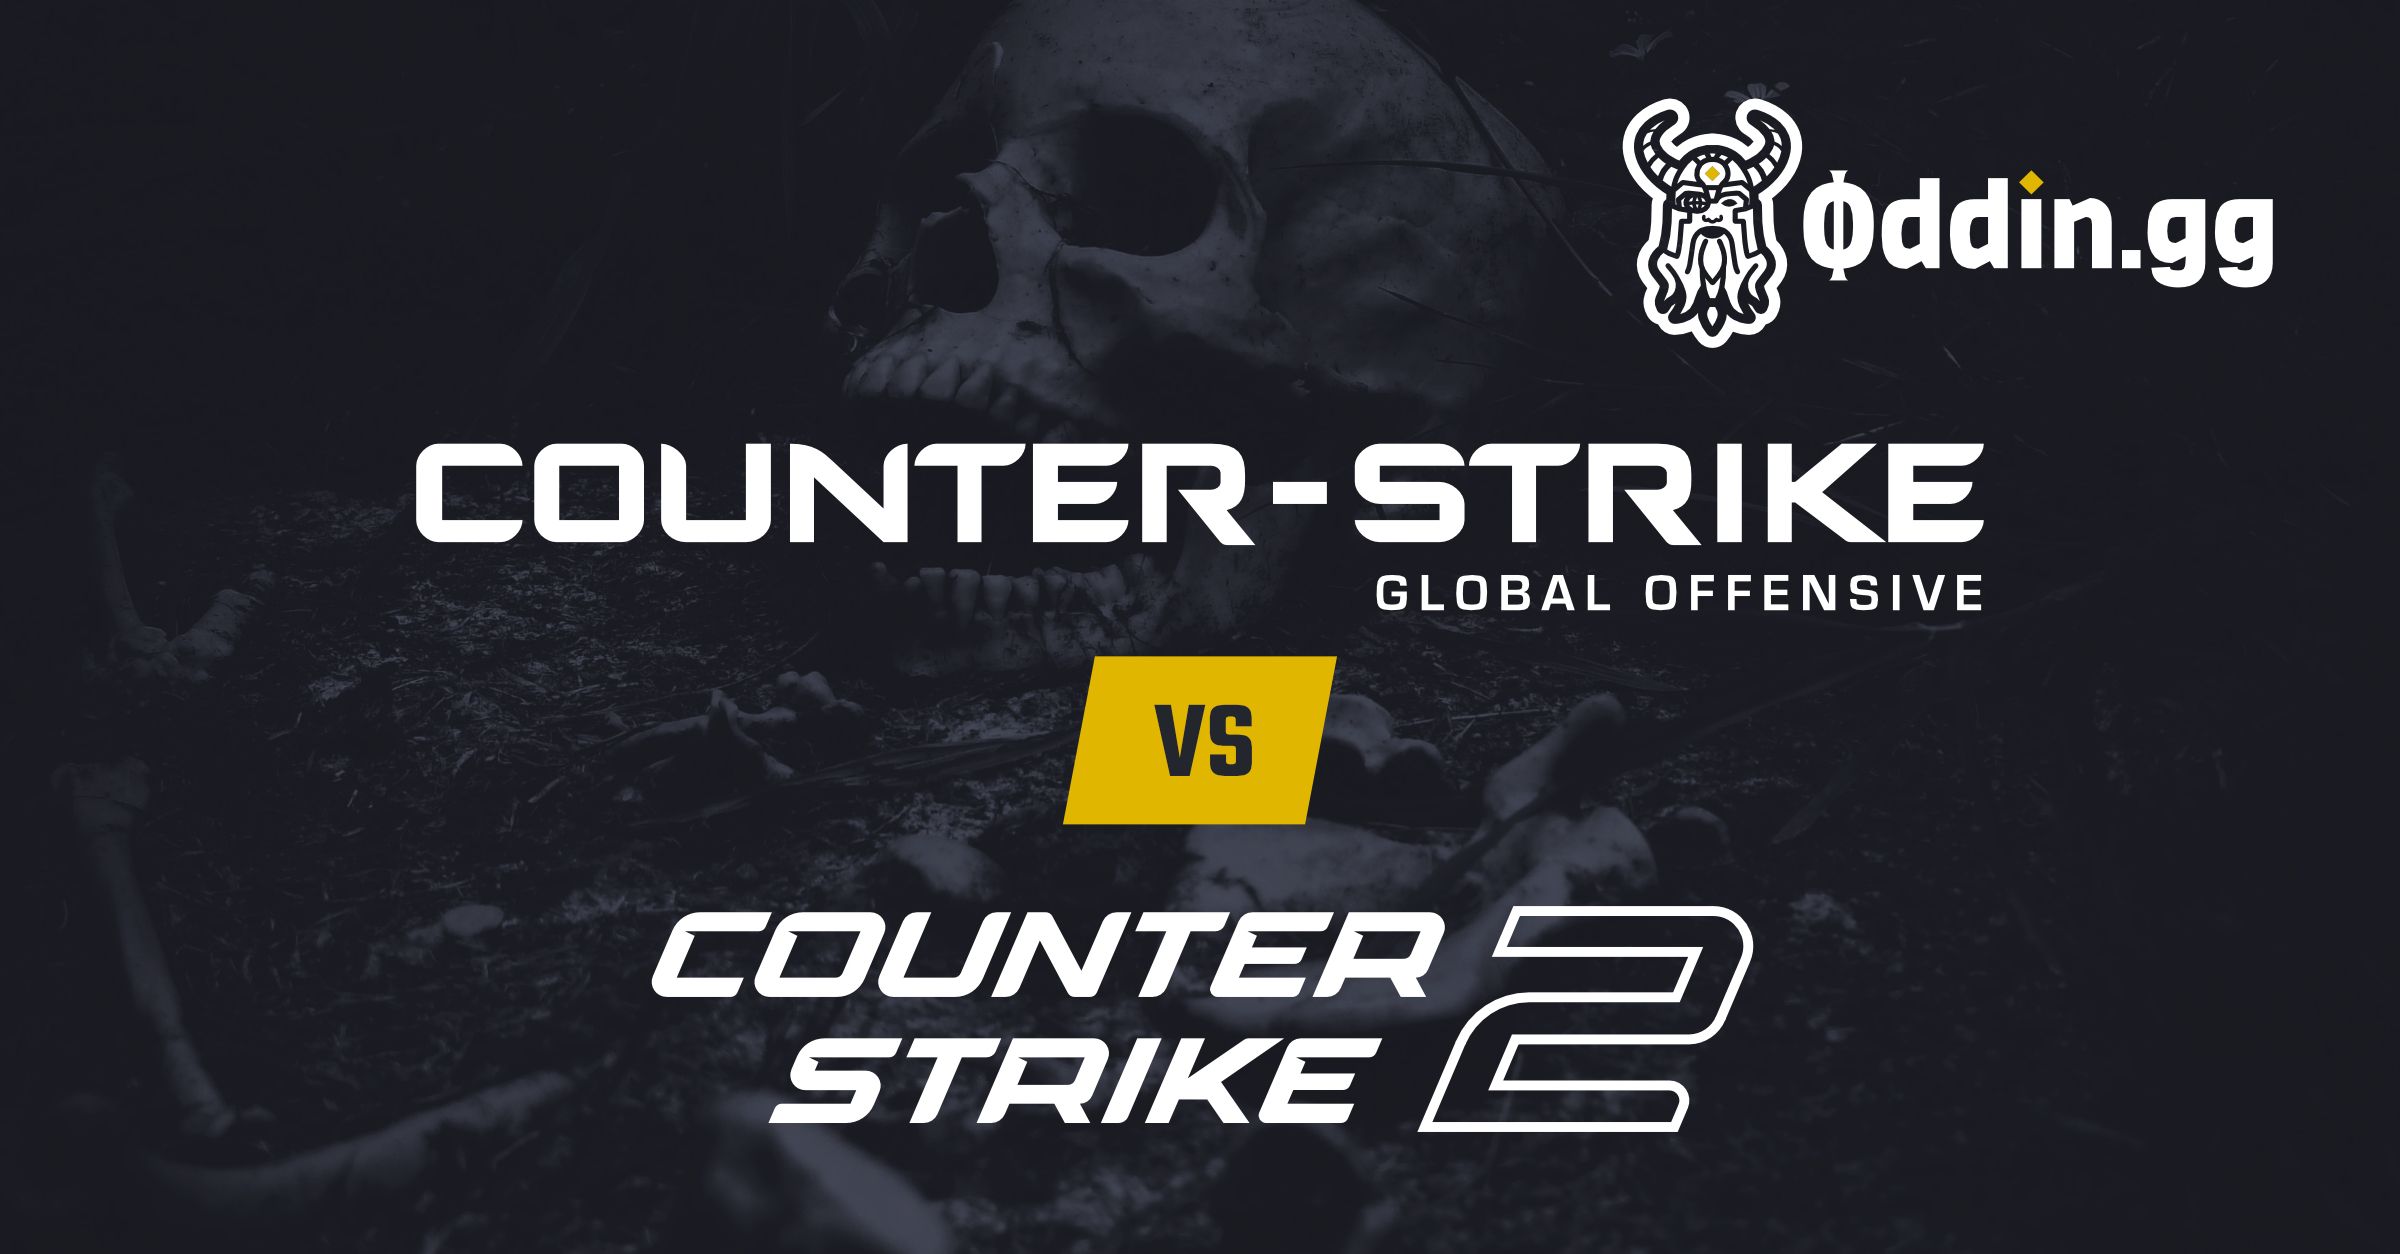 Counter-Strike News & Coverage